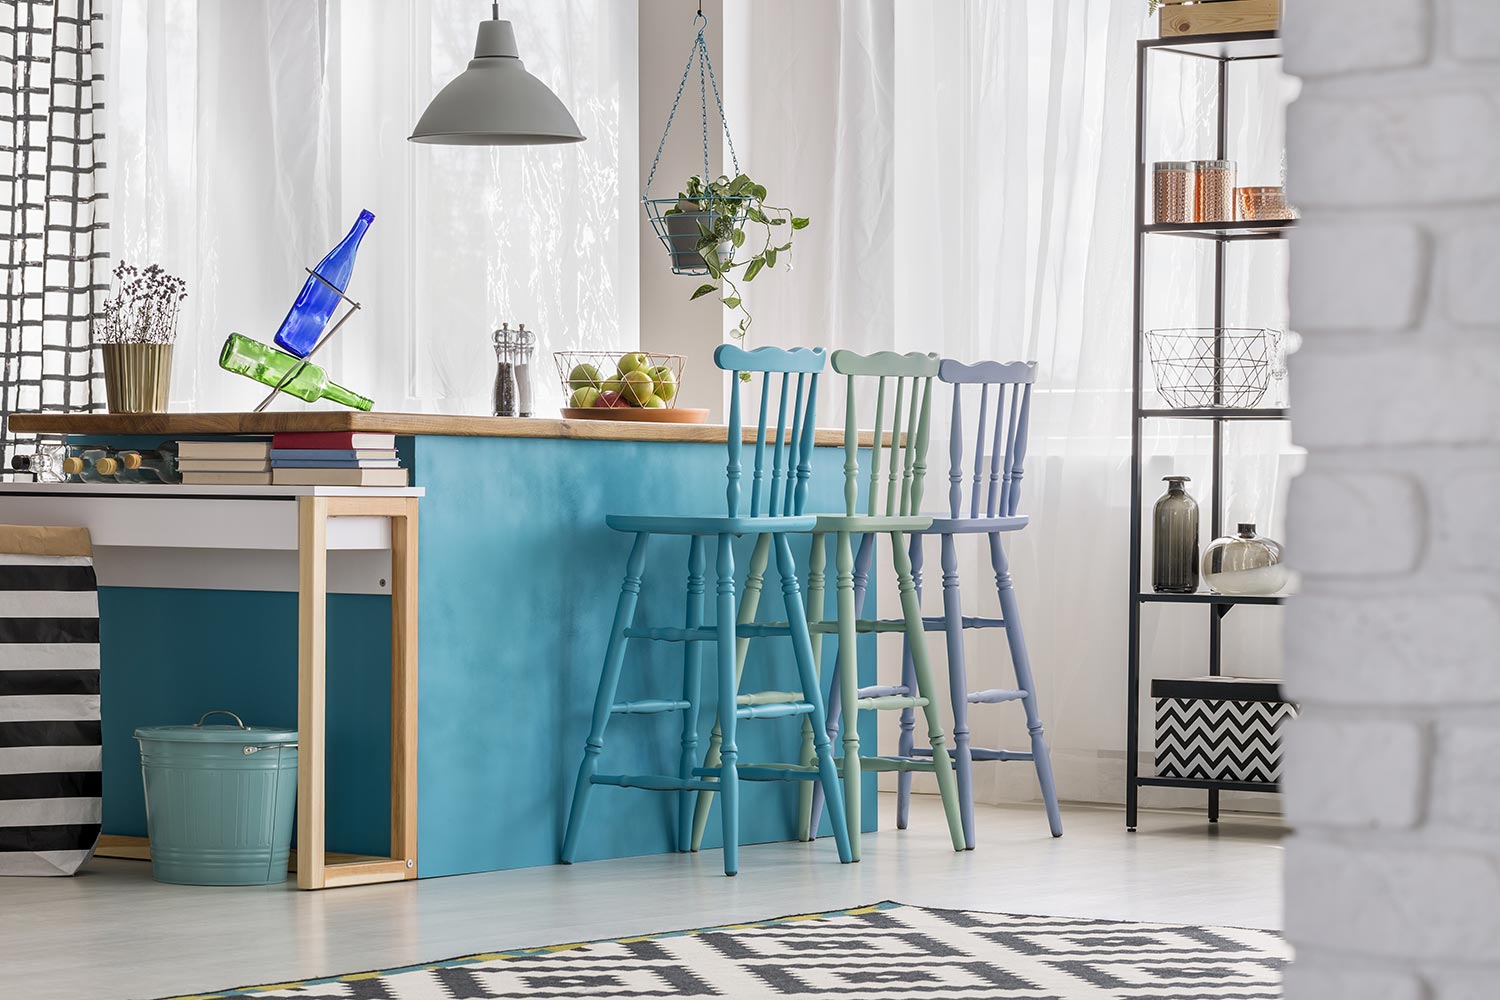 Pastel barstools in colorful kitchen interior with turquoise island